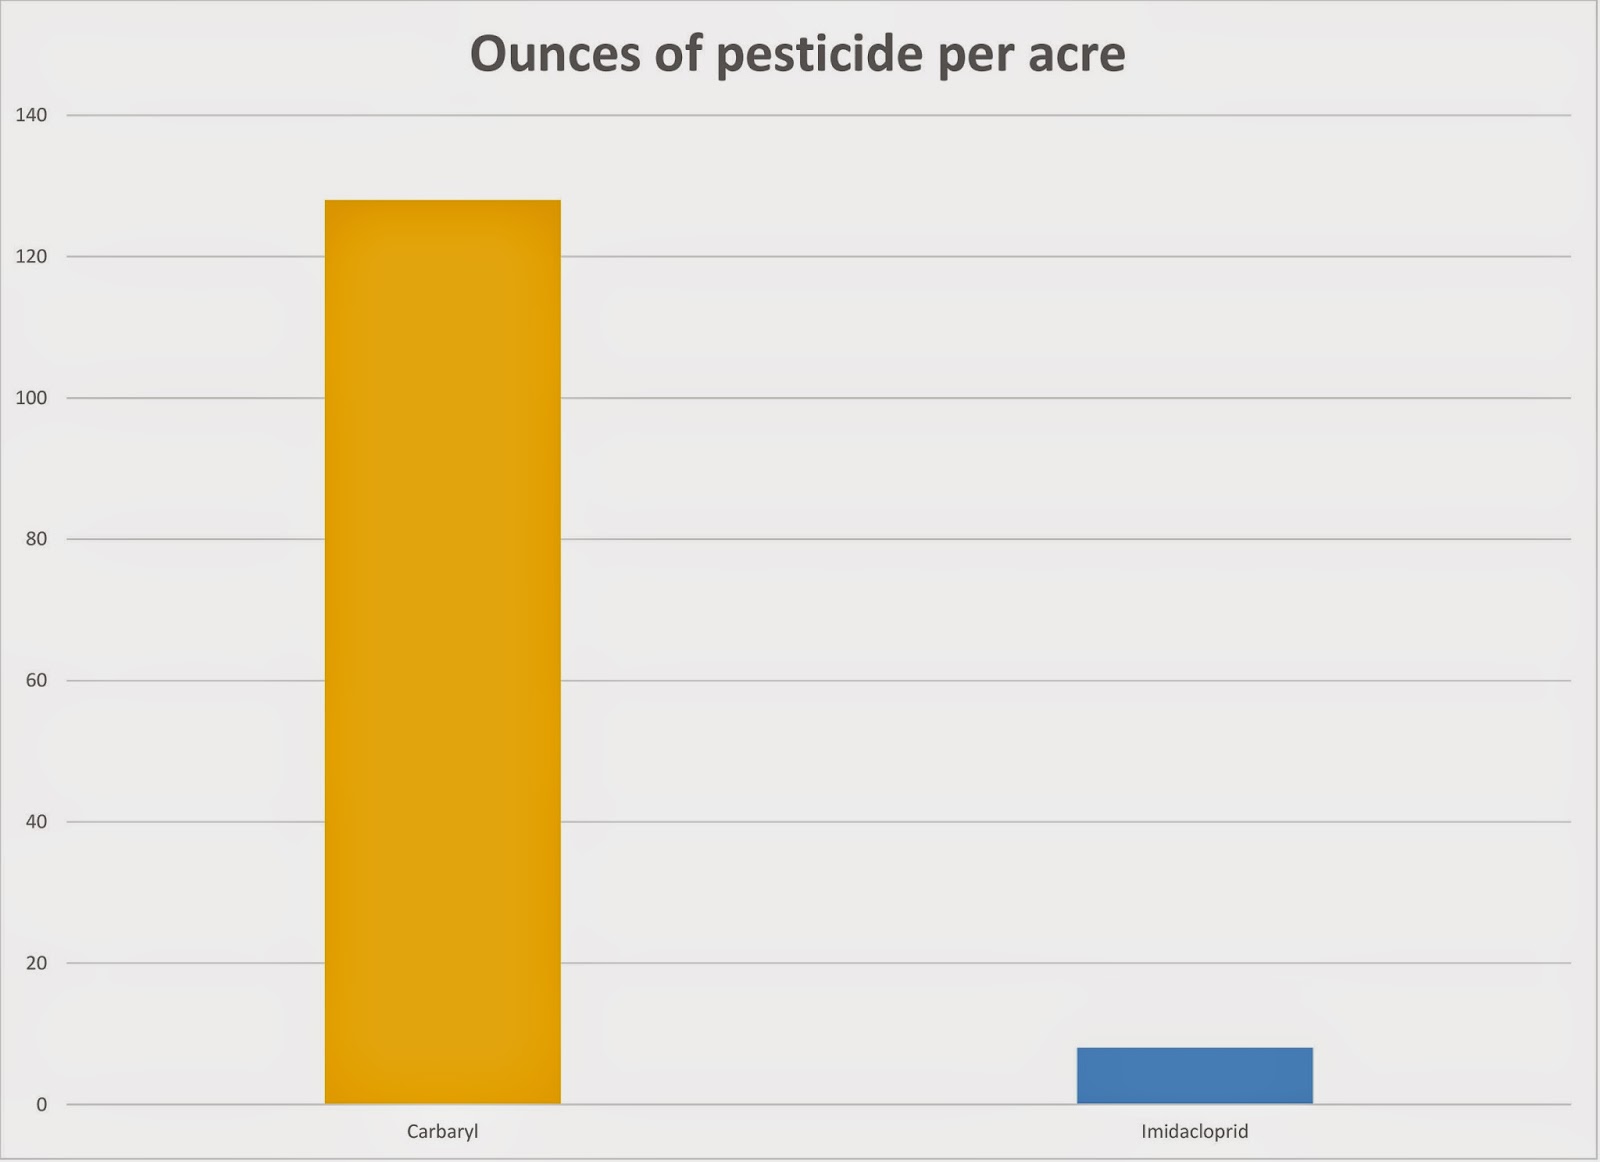 ounces of insecticide per acre bar chart, bar of Carbaryl goes up to 130 ounces.